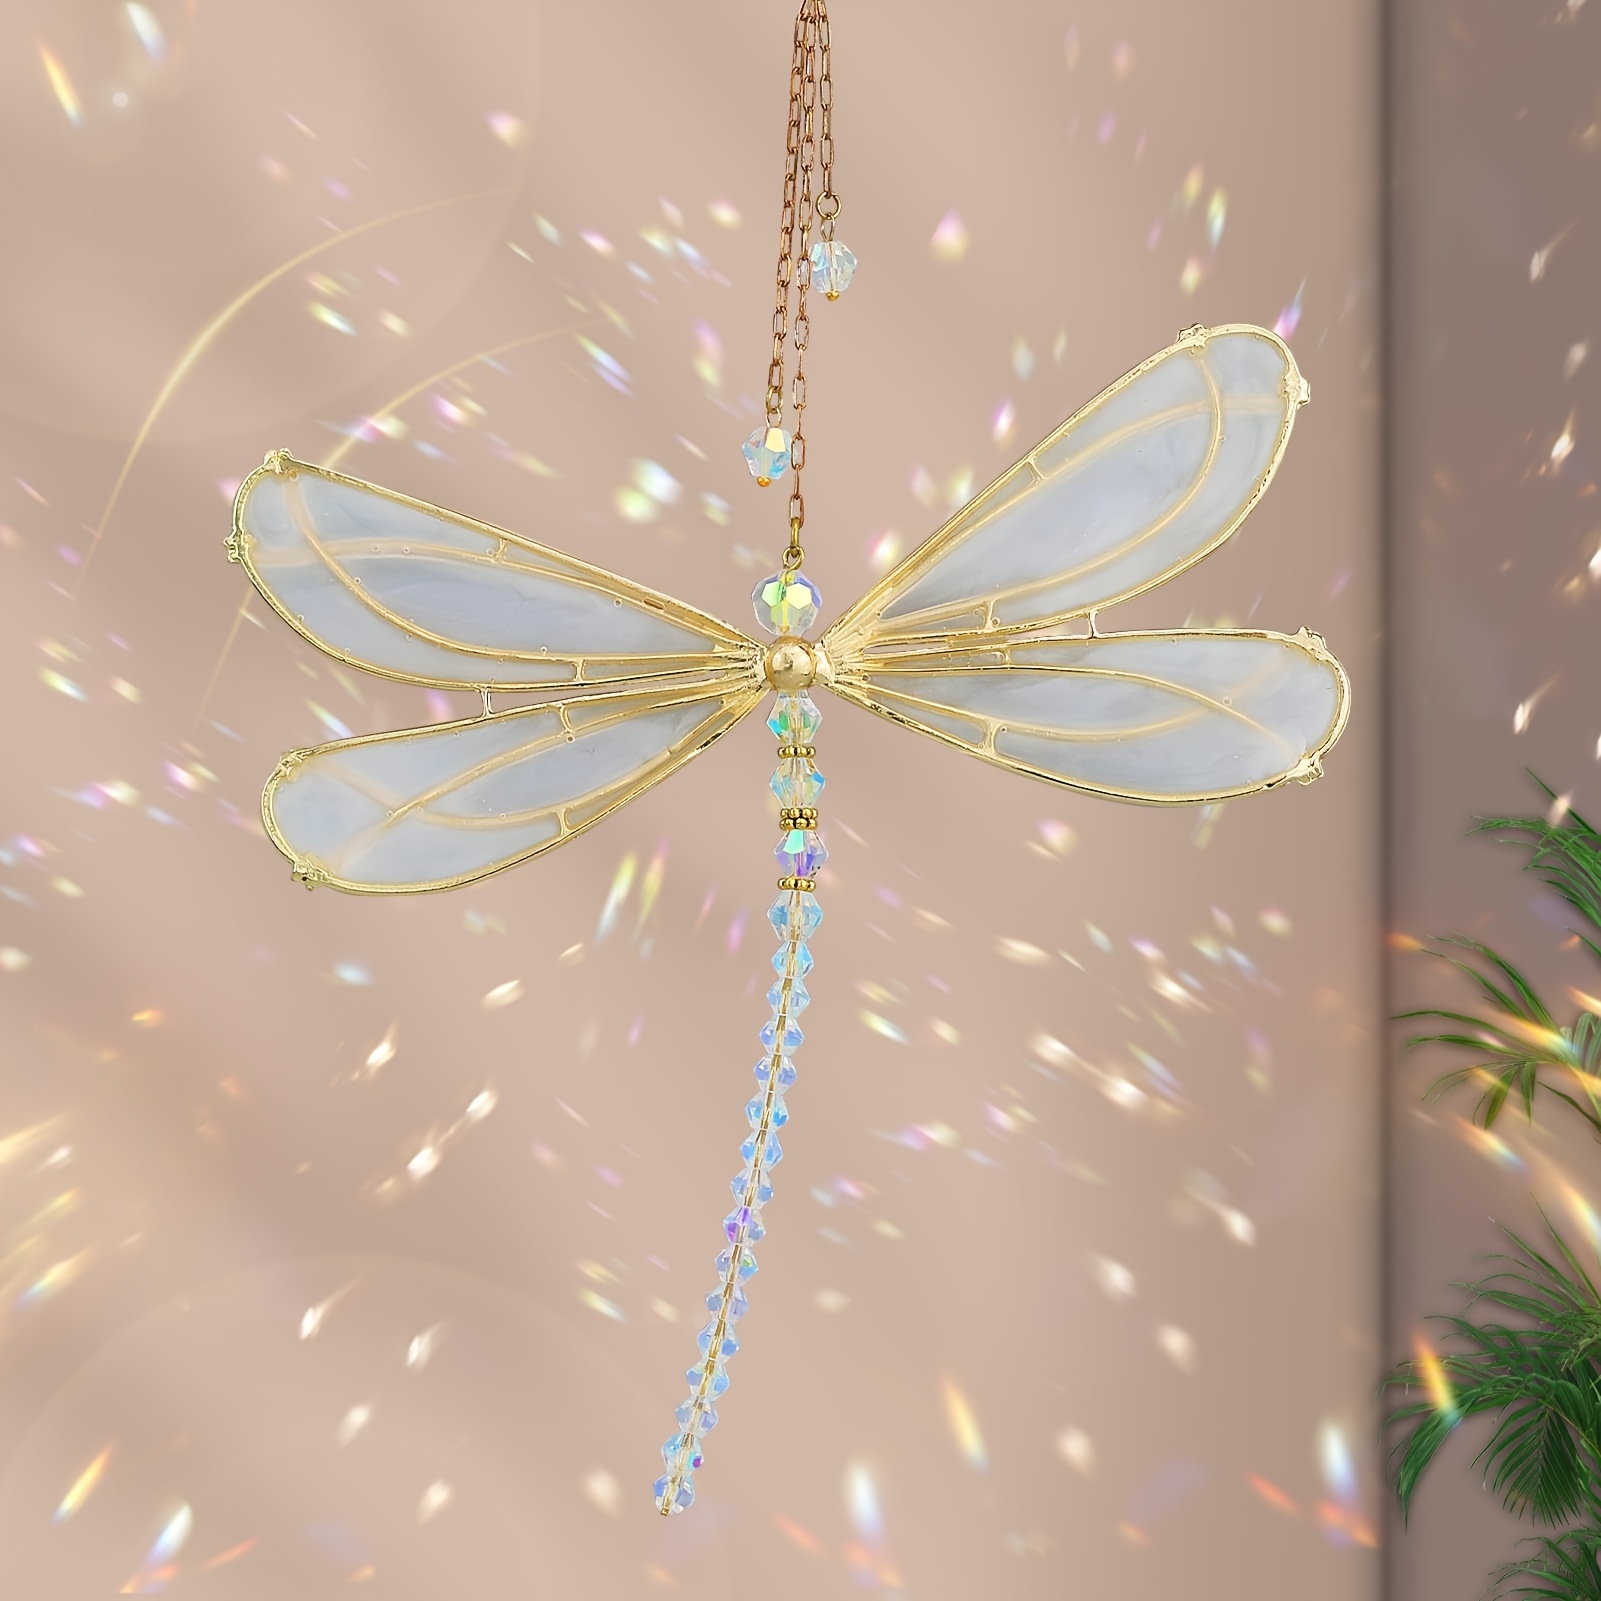 

1pc, Delicate Dragonfly Suncatcher Hanging Ornament With Crystal Accents, 9.4x10.23in Metal Dragonfly For Home Outdoor Decor, Garden Decoration, Glass Material, 15cm Chain, Elegant Window Display